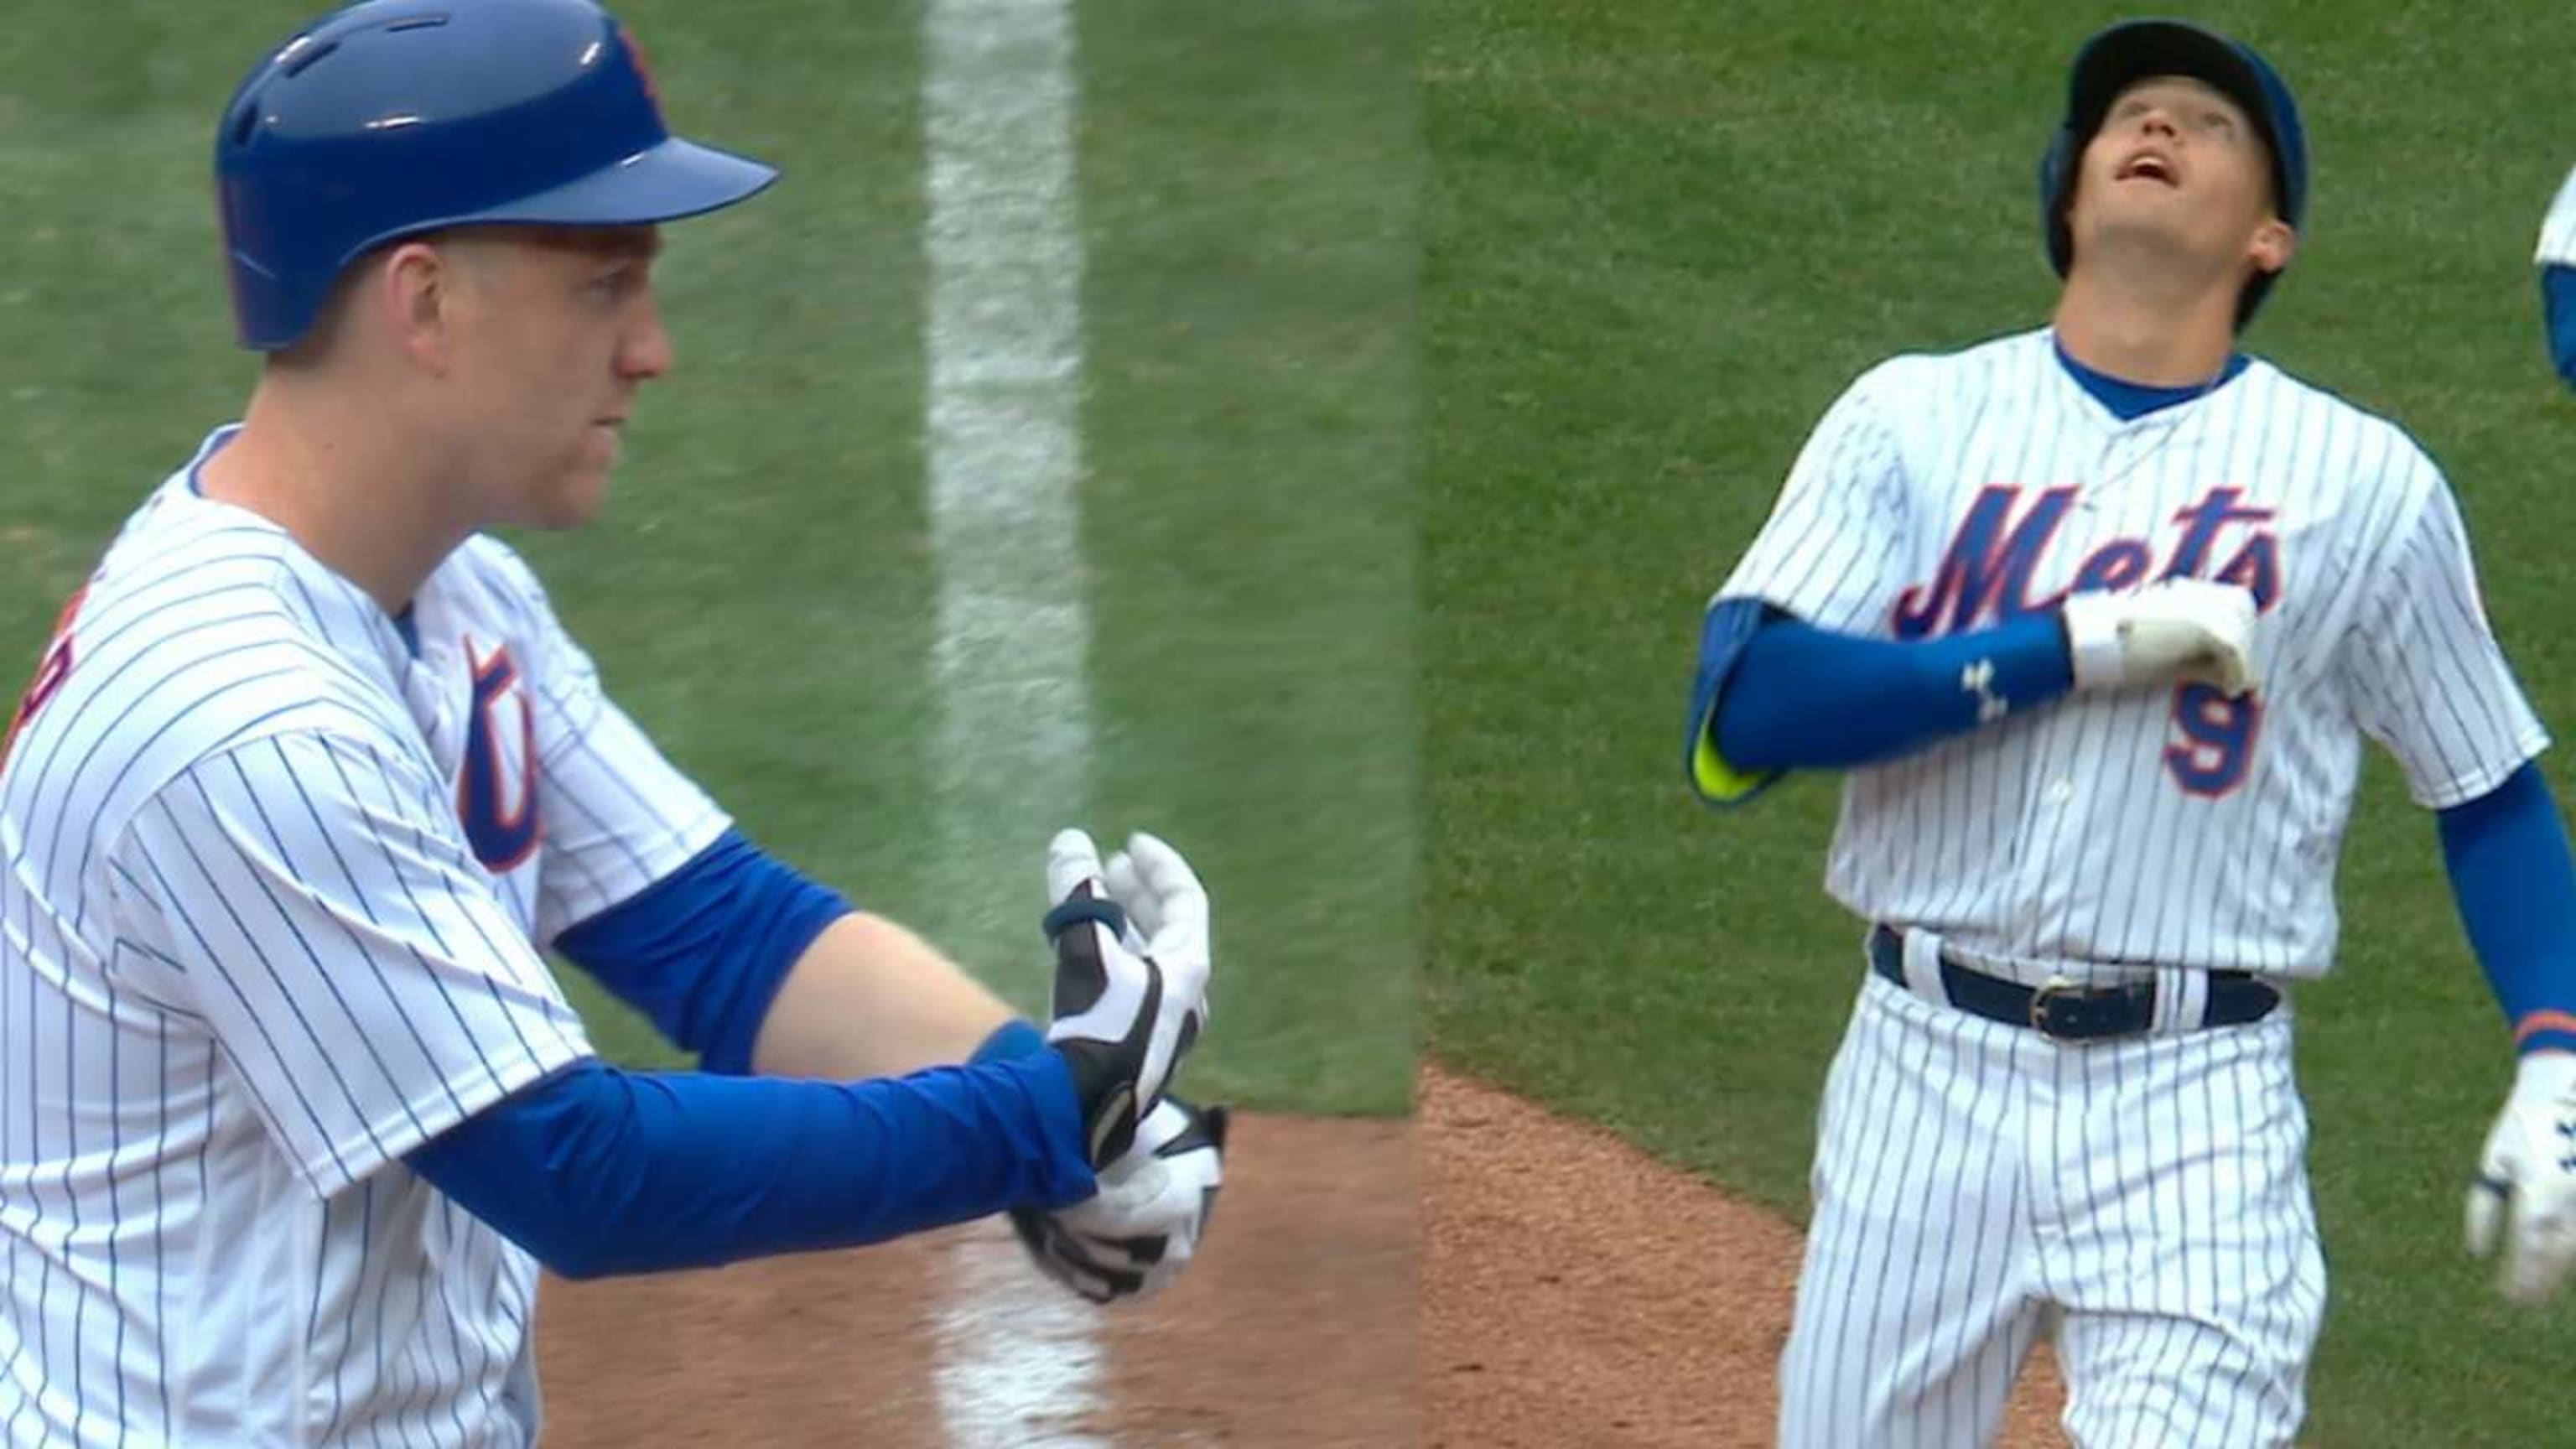 The Mets debuted the salt and pepper, their celebration for 2018